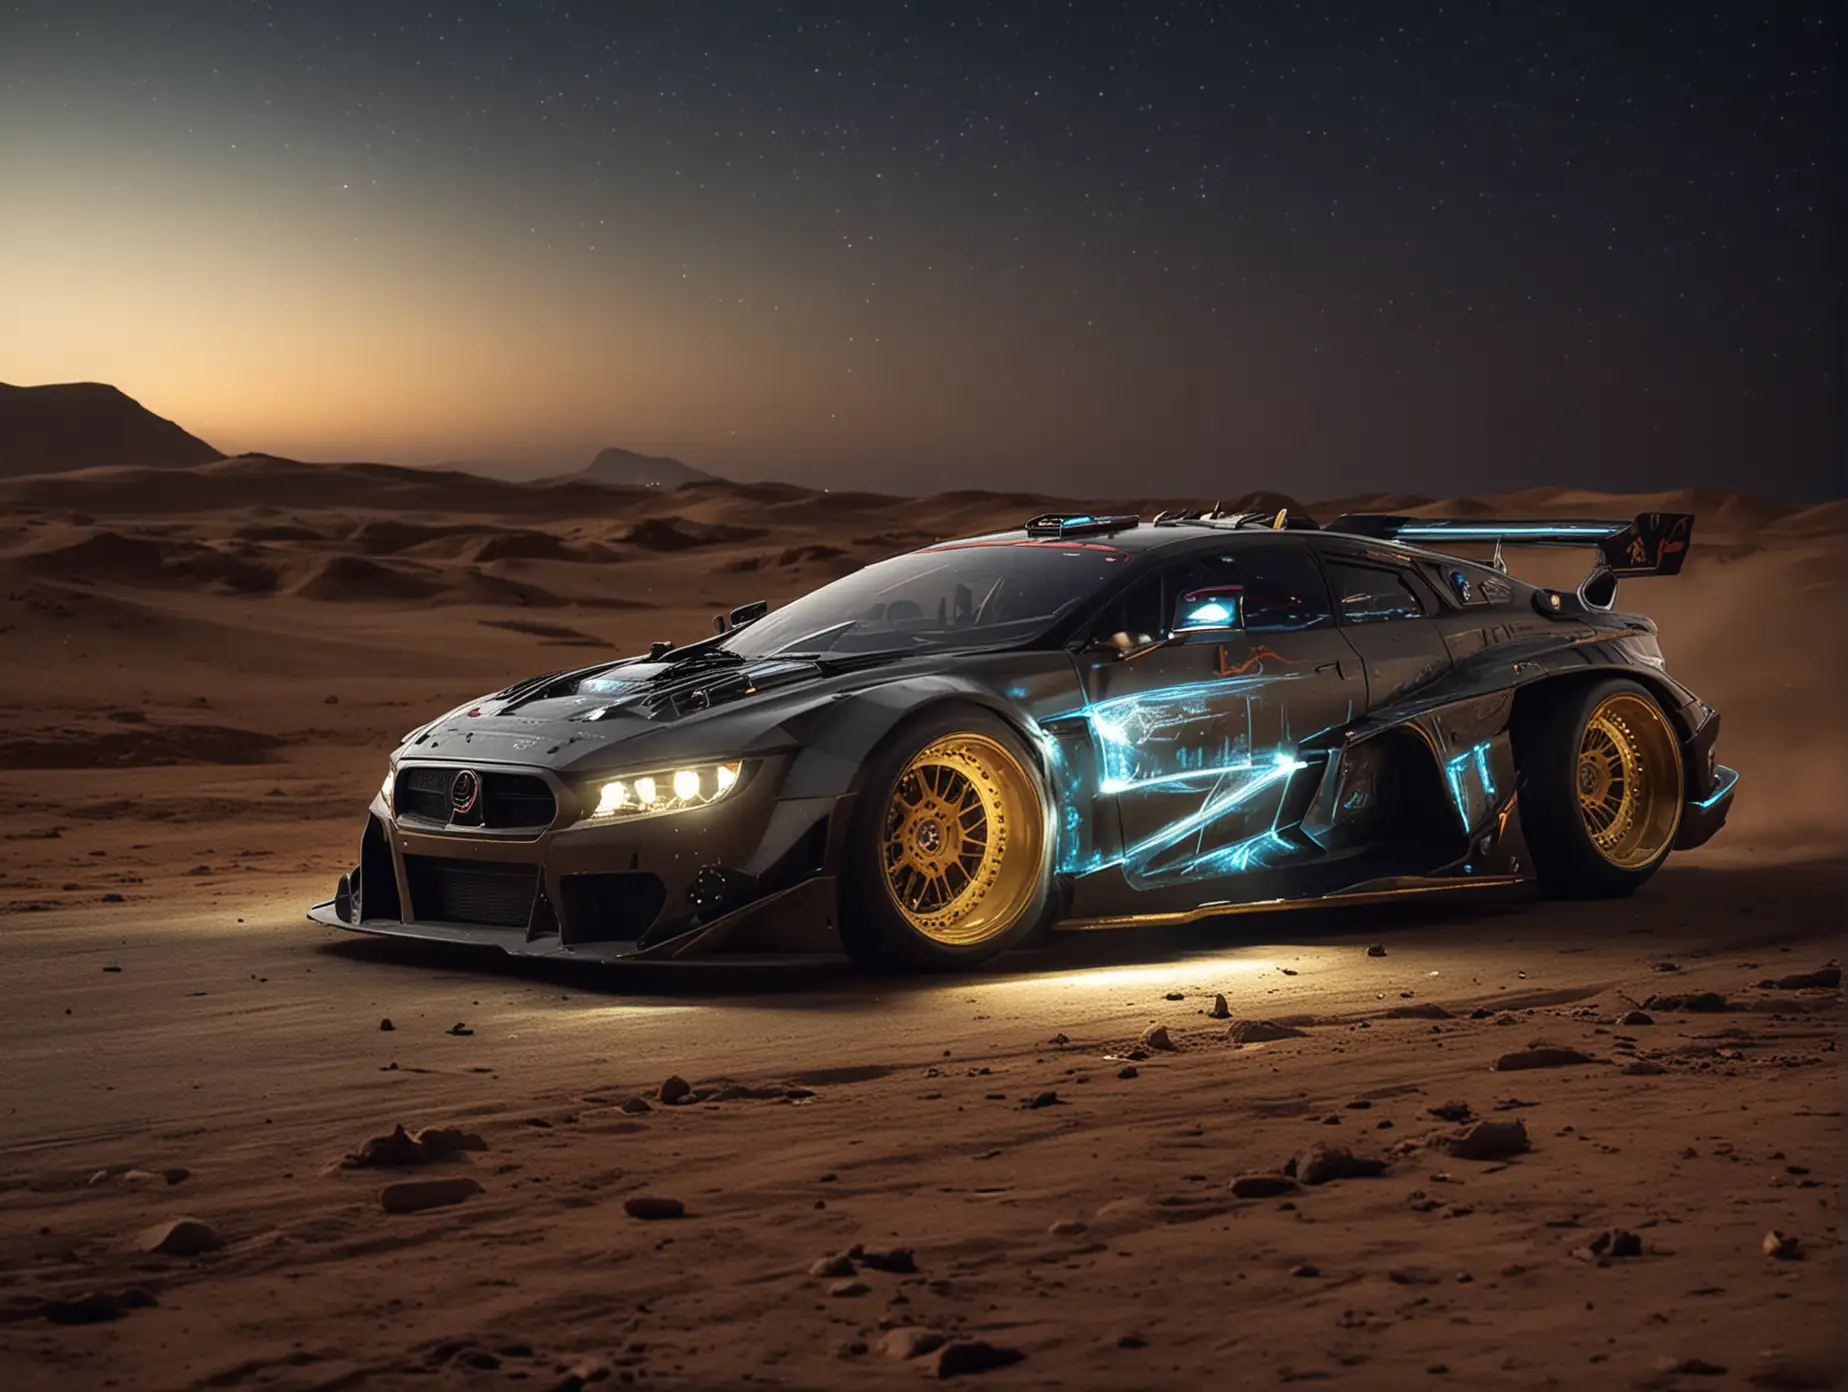 Create a futuristic drifting car for Egypt King in the countryside at night